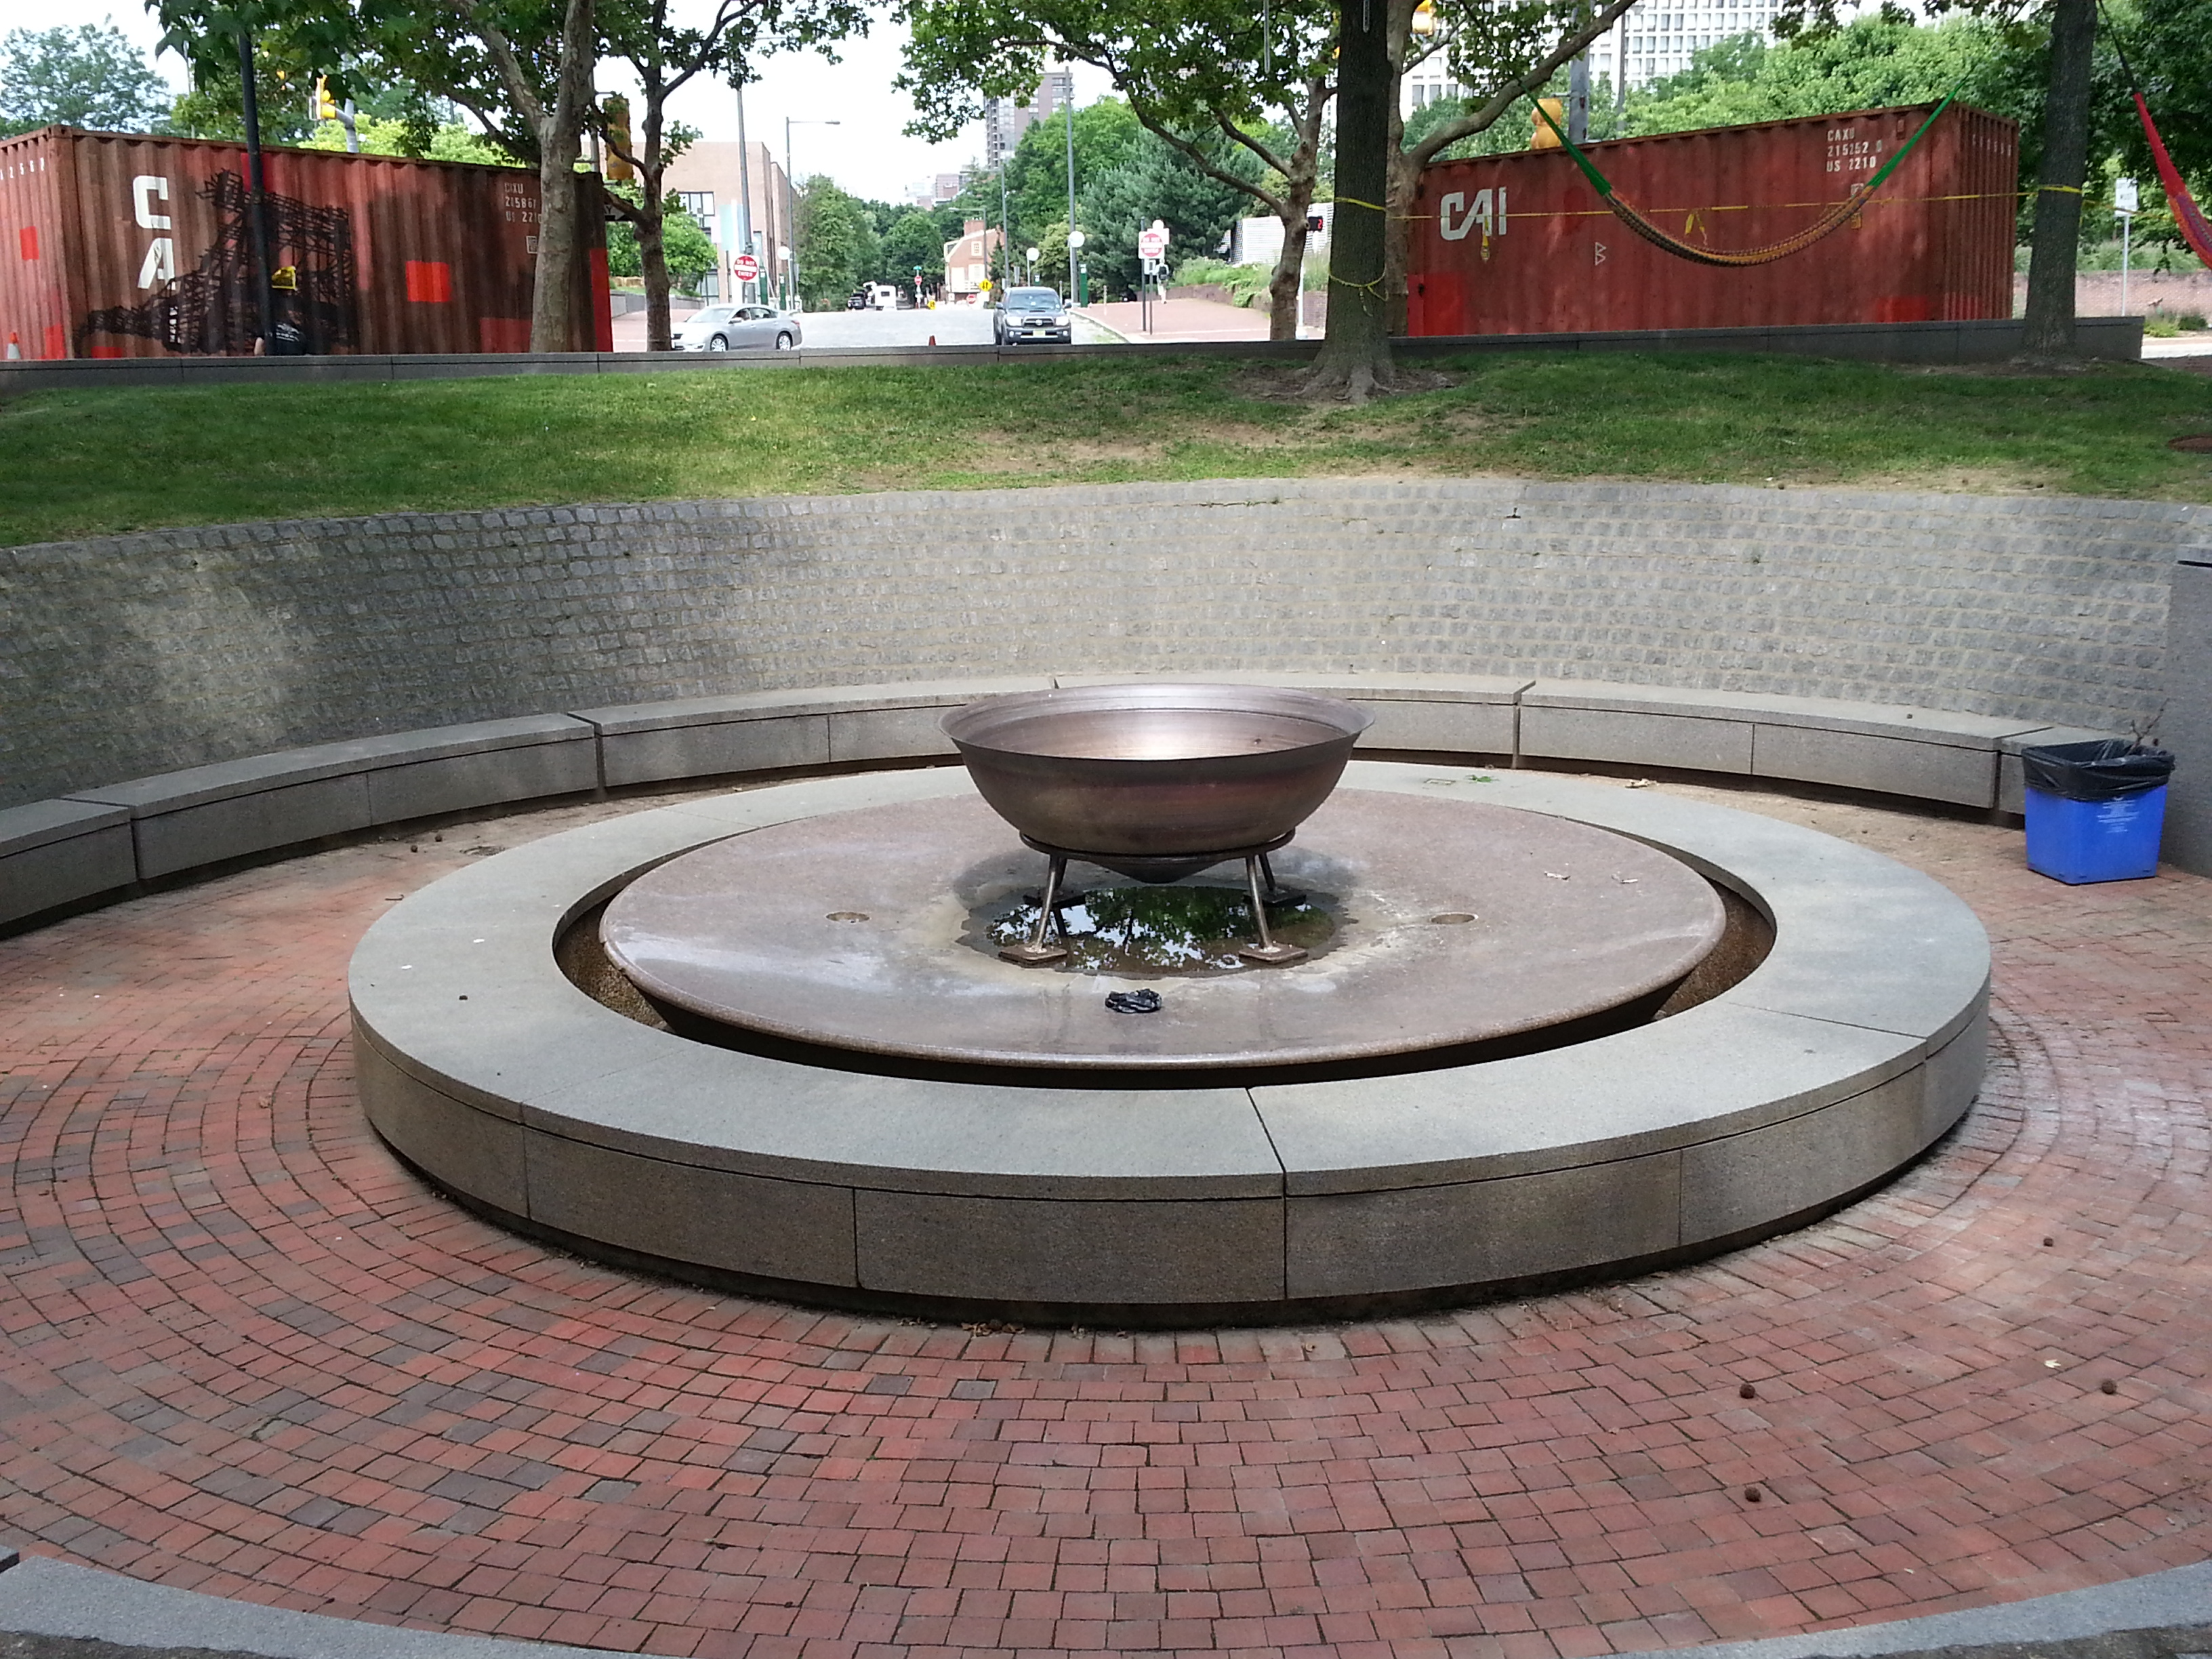 This old sculpture garden fountain will come to life for the first time in 15 years - with a new fire pit inside.